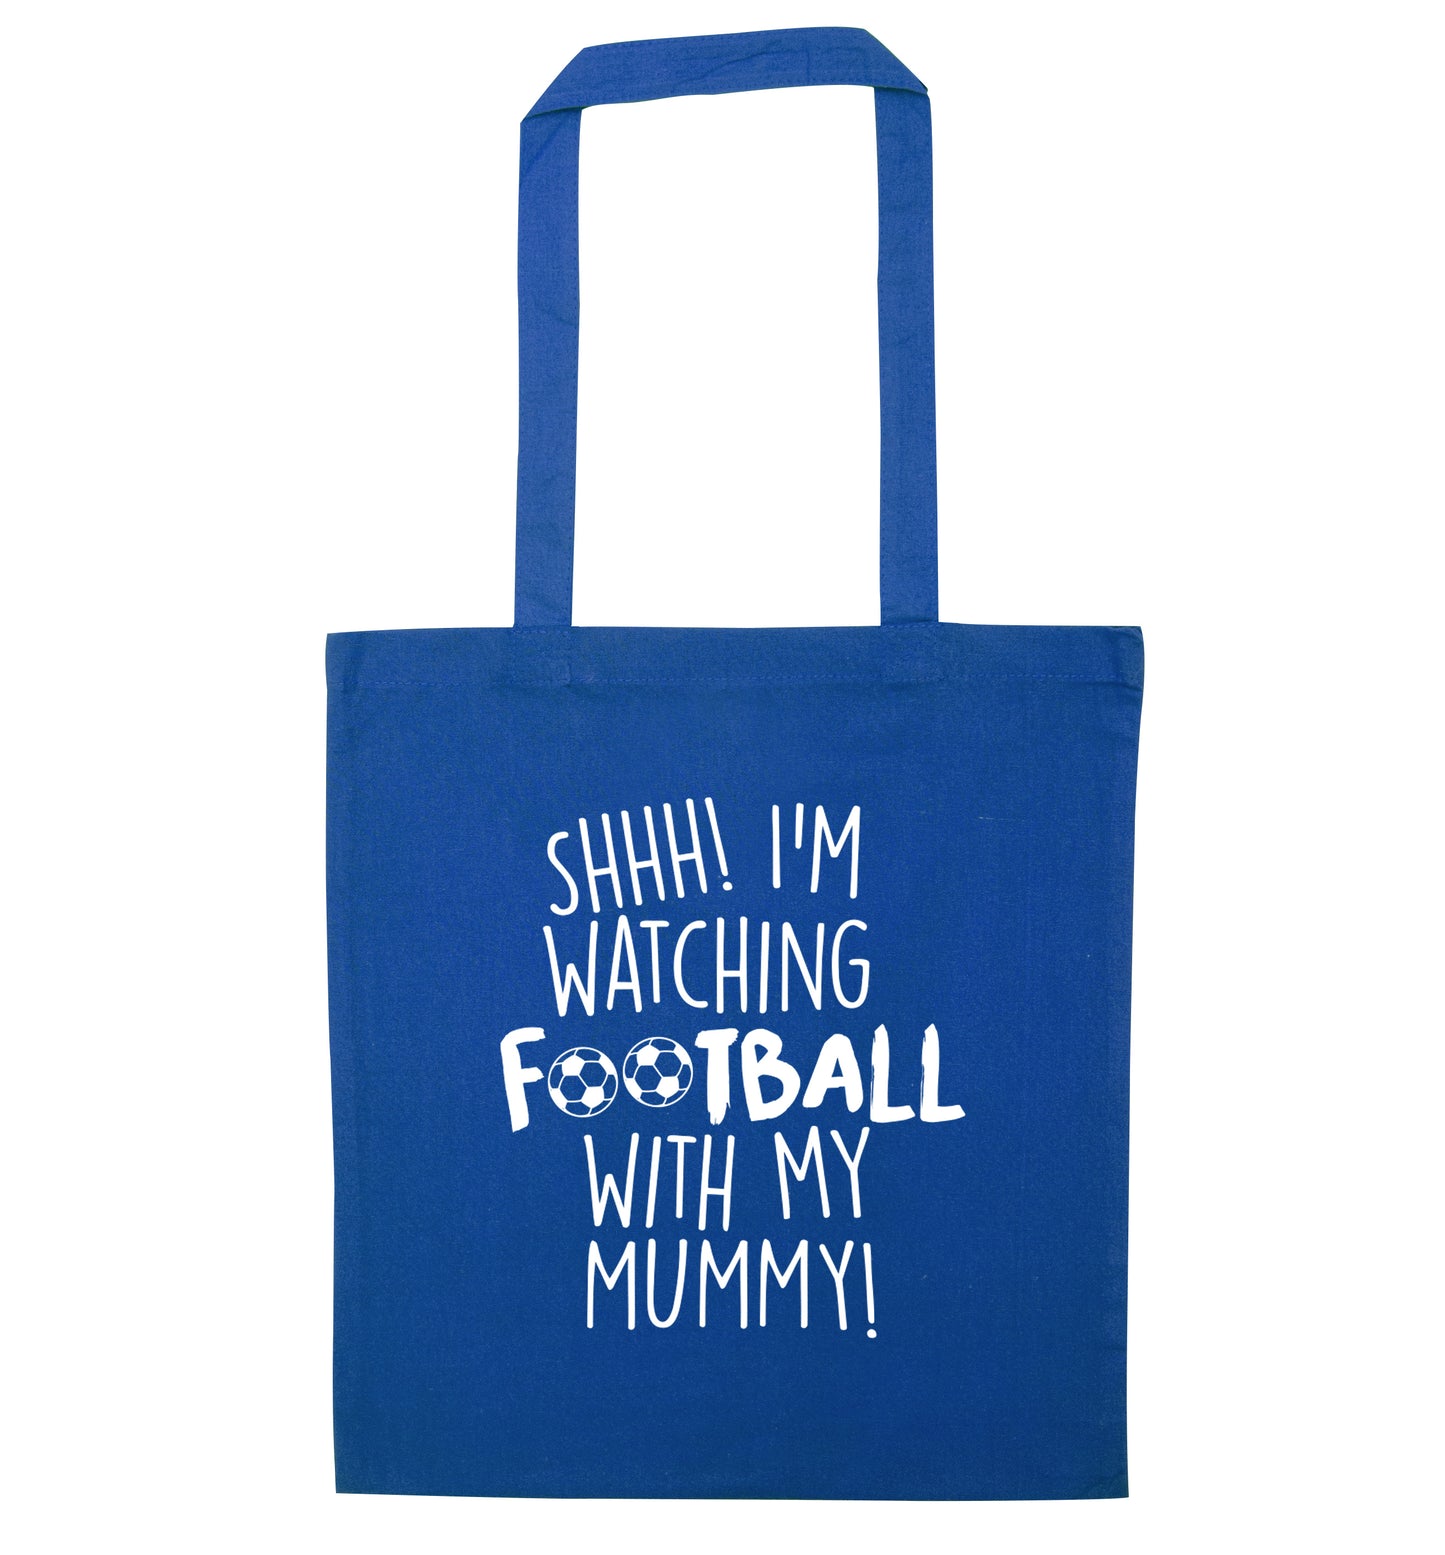 Shhh I'm watching football with my mummy blue tote bag